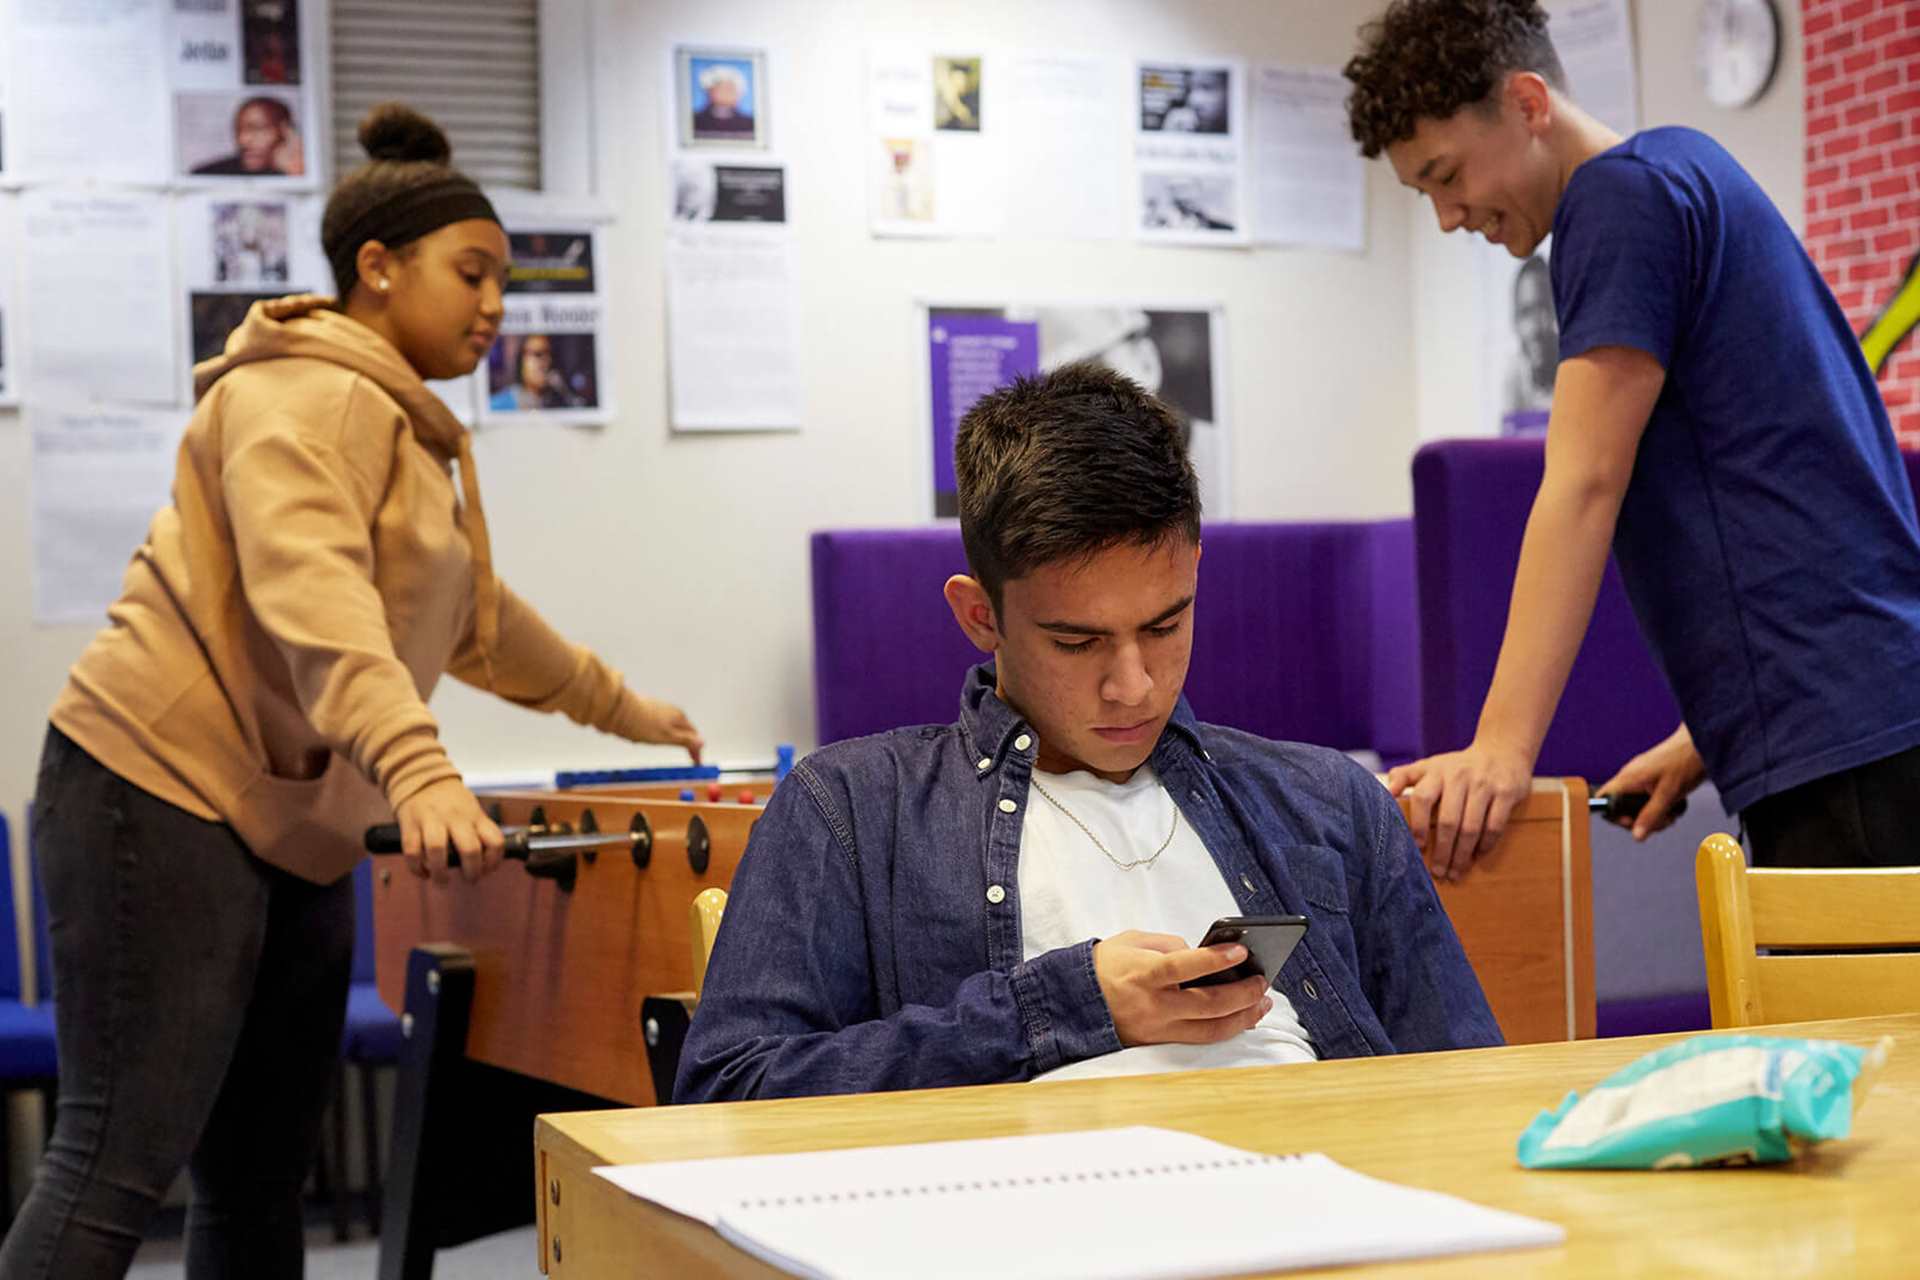 A young person is looking down at his phone at a table in a common room. There are two young people behind him playing table football.